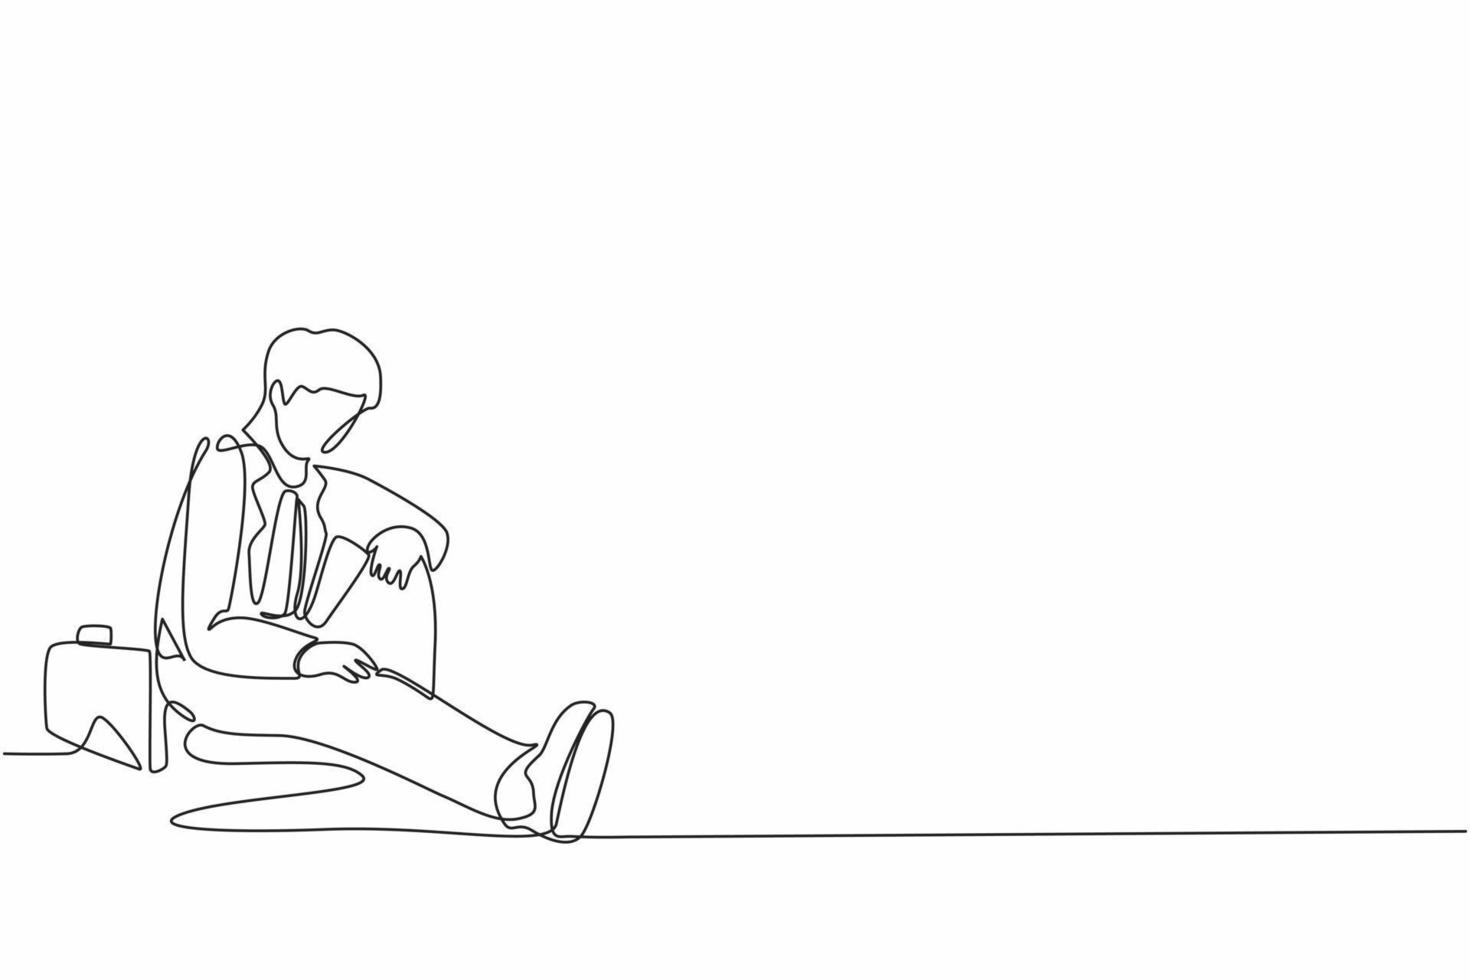 Single one line drawing depressed businessman with briefcase sitting in despair on the floor. Entrepreneur sad gesture expression. Professional burnout syndrome. Continuous line graphic design vector